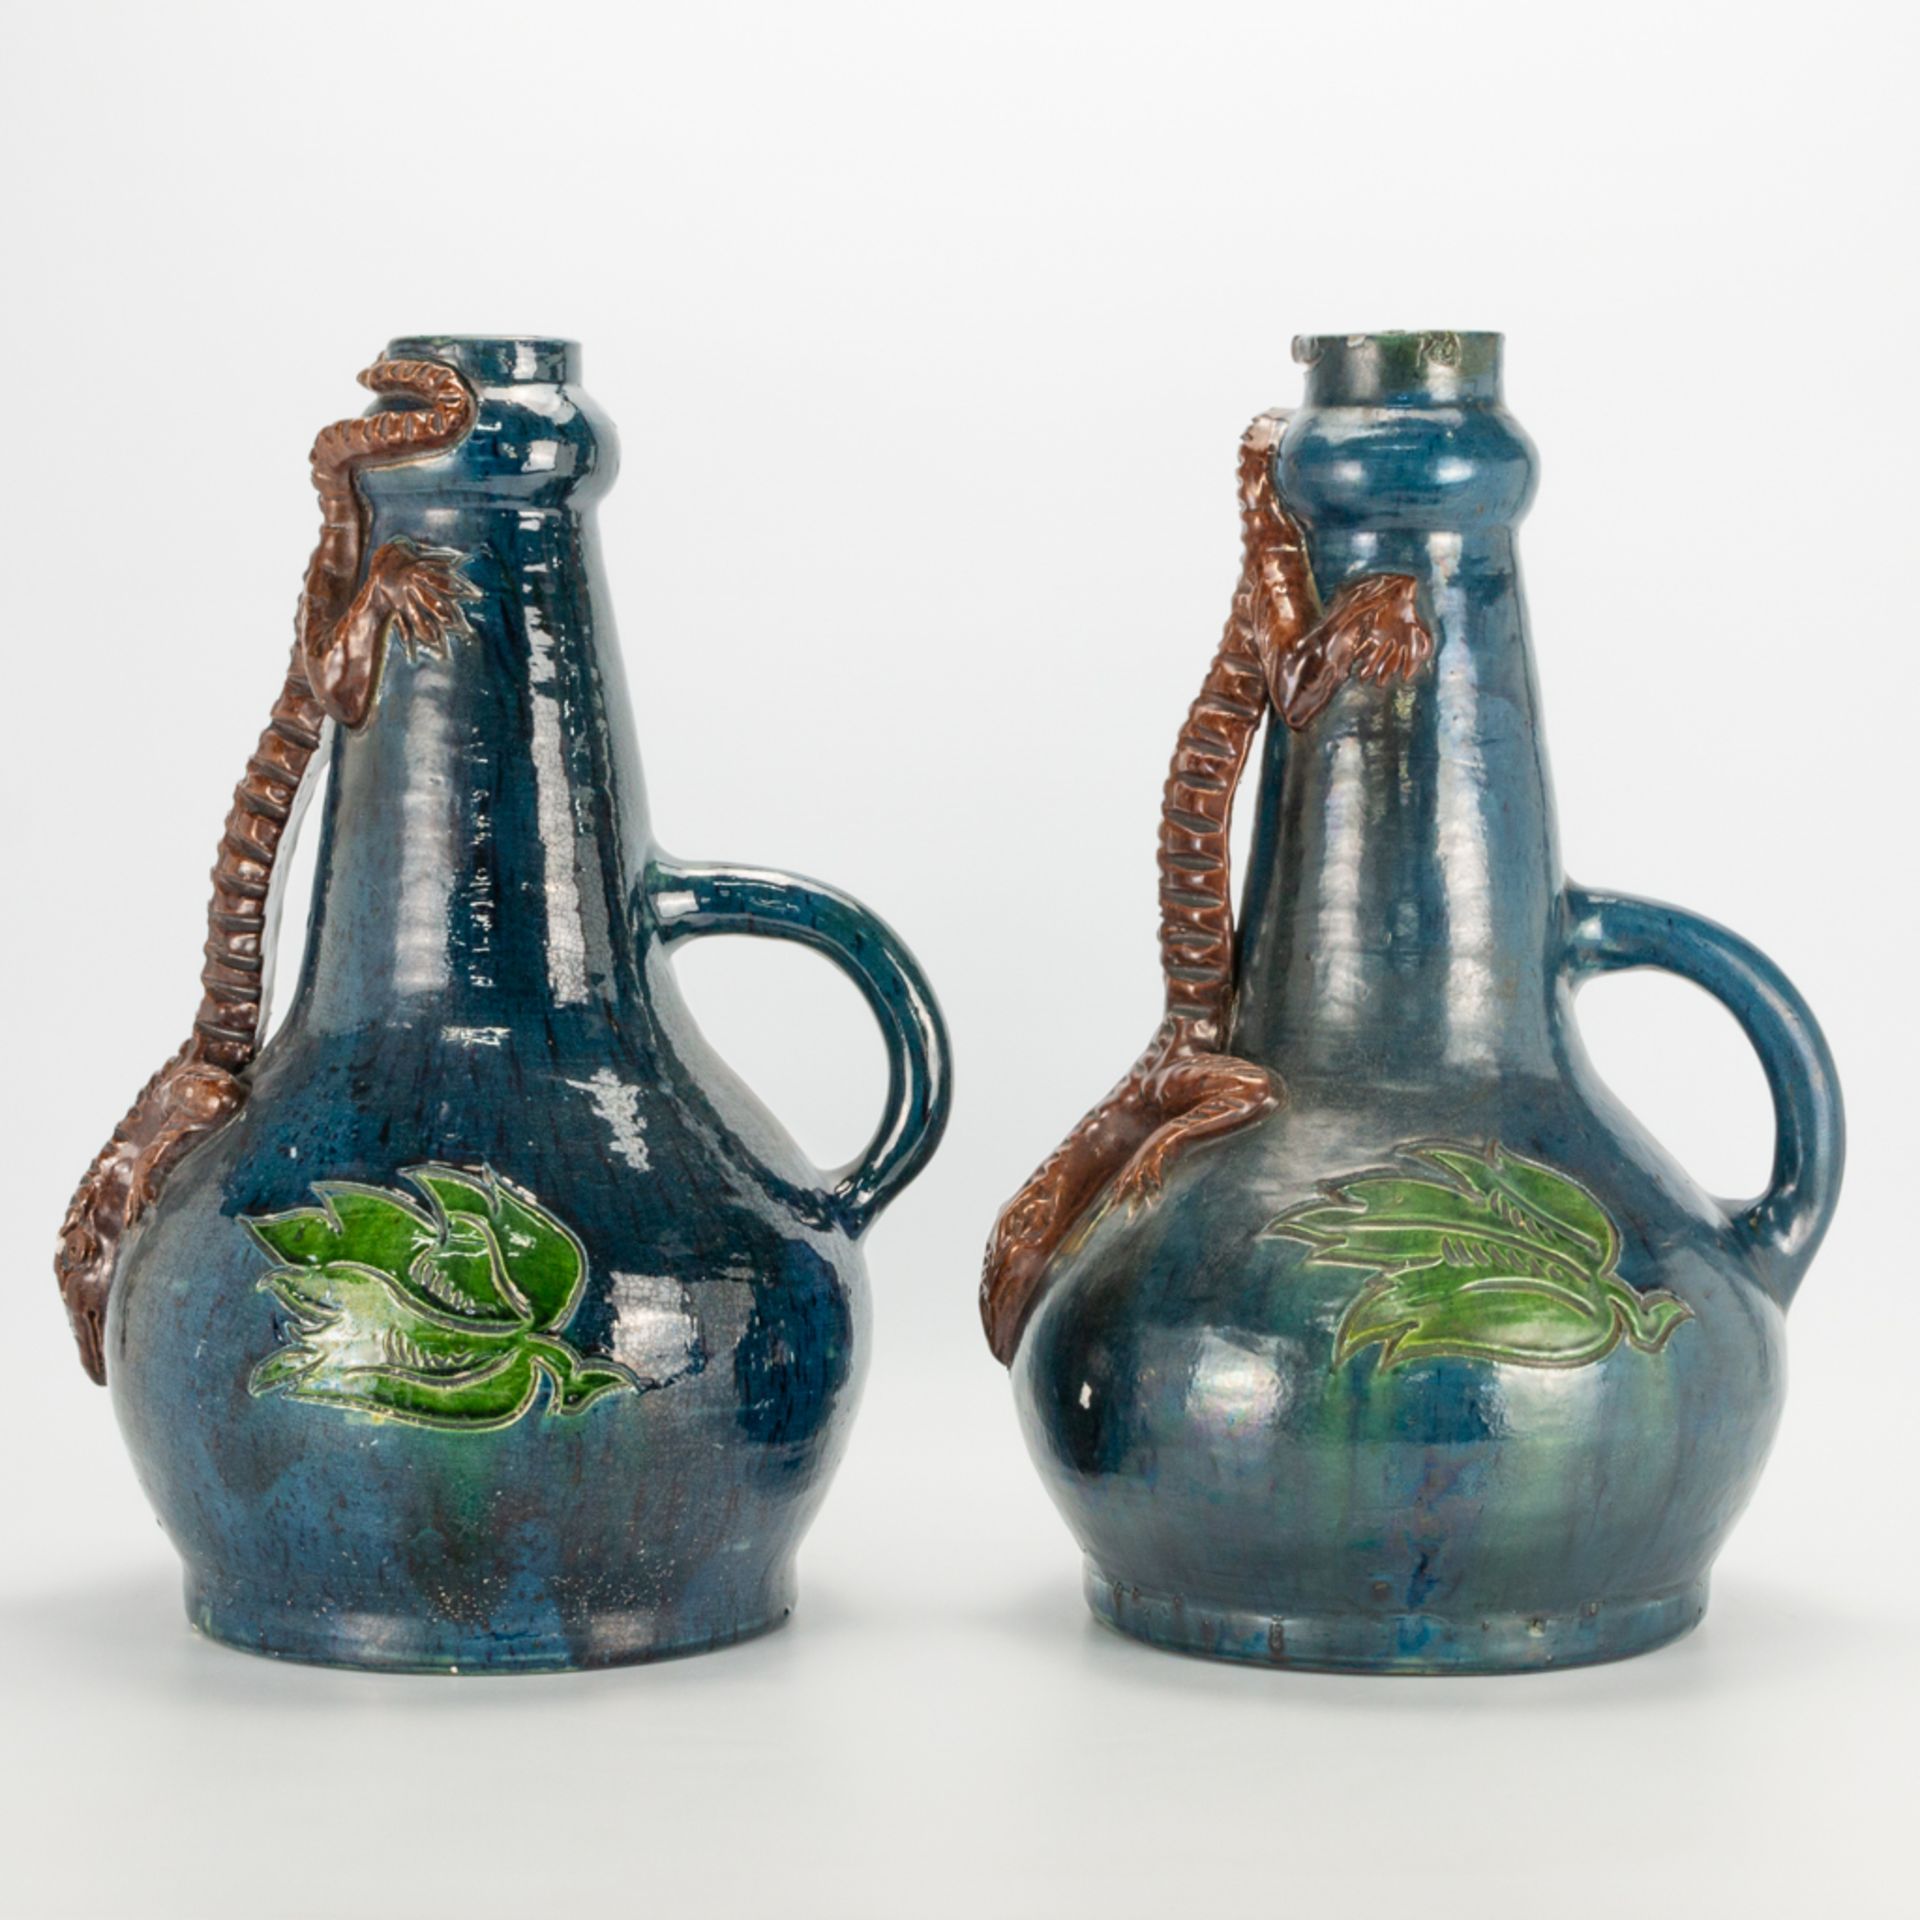 A pair of vases made in Flemish Earthenware with the decor of a salamander. (27 x 30 x 45 cm) - Image 6 of 20